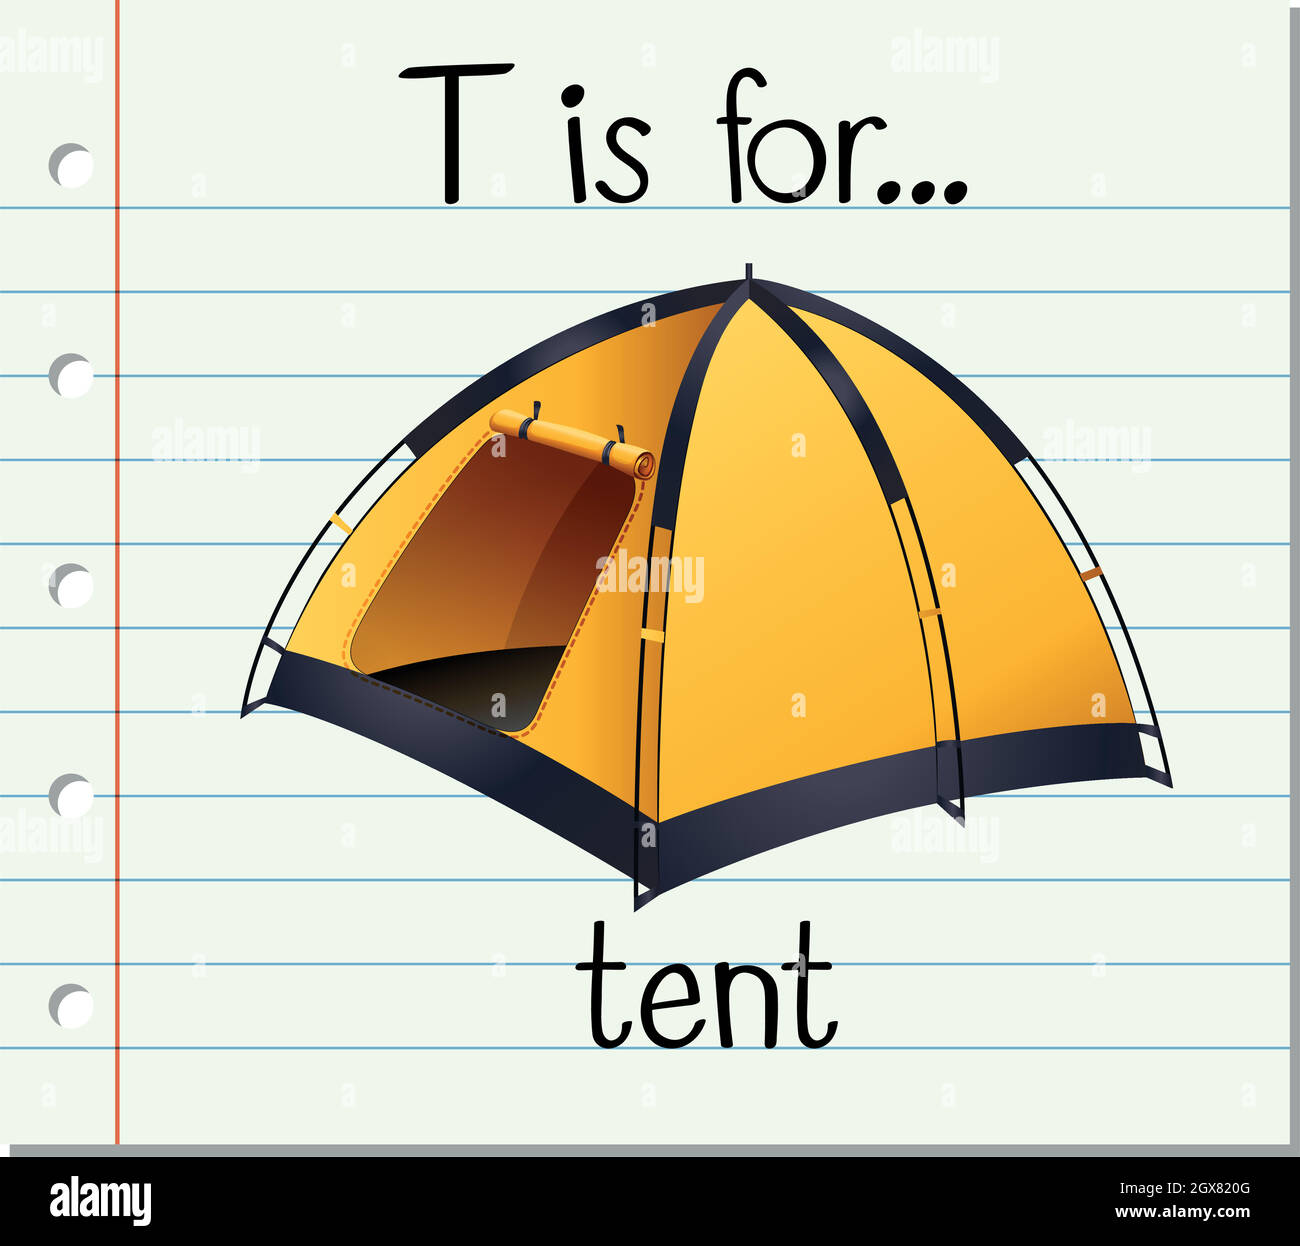 Flashcard letter T is for tent Stock Vector